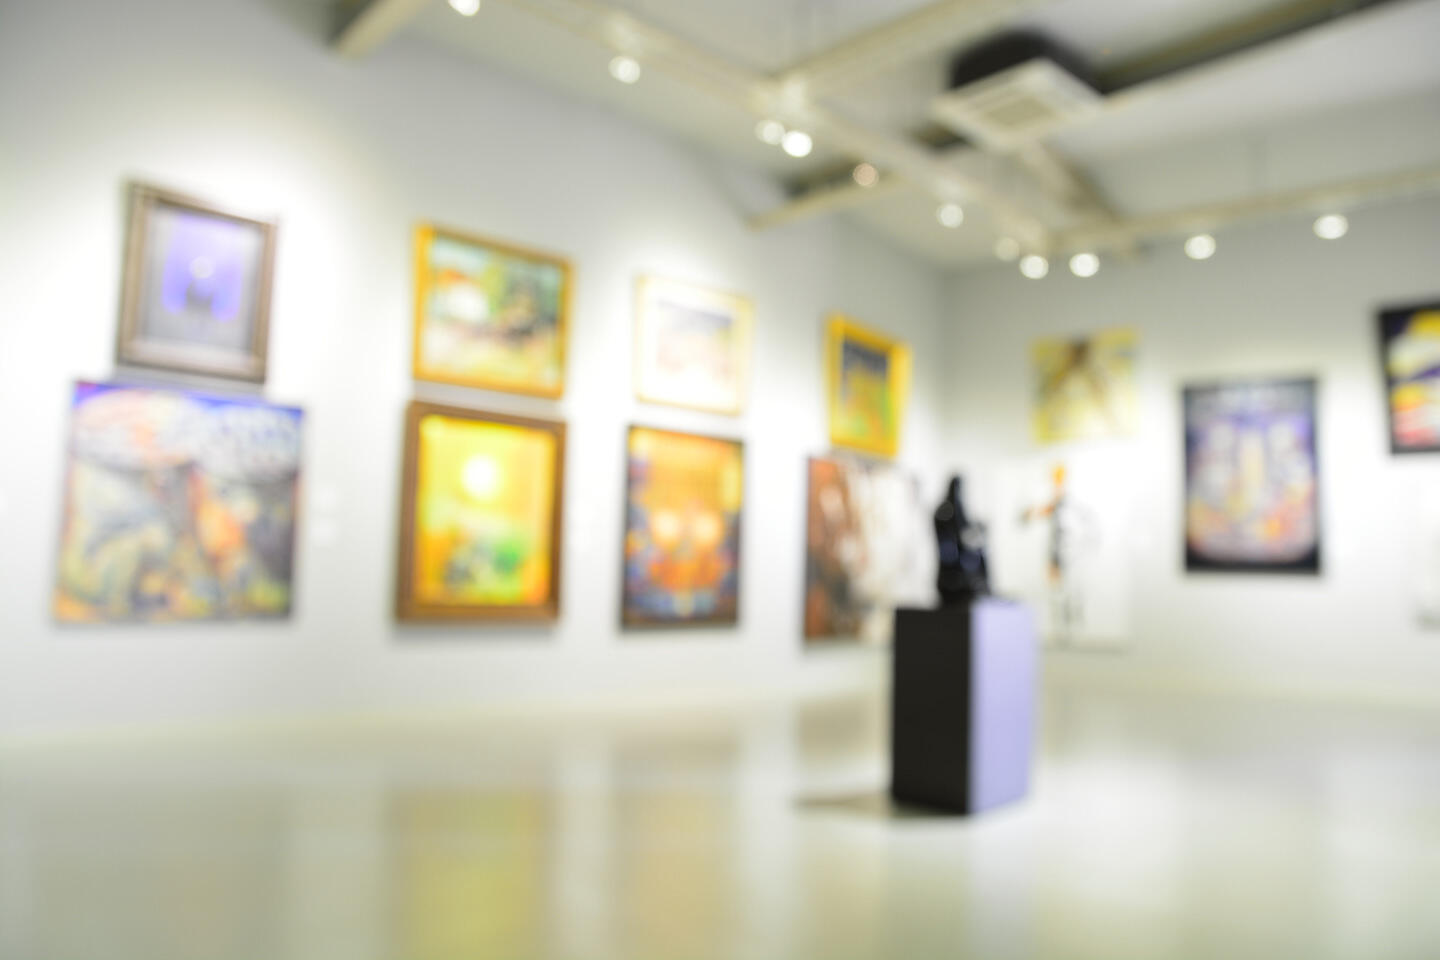 Blurred interior view of a contemporary art gallery with walls adorned with colorful paintings in varied frames and a sculpture on a pedestal in the center, creating an immersive and dynamic artistic atmosphere.